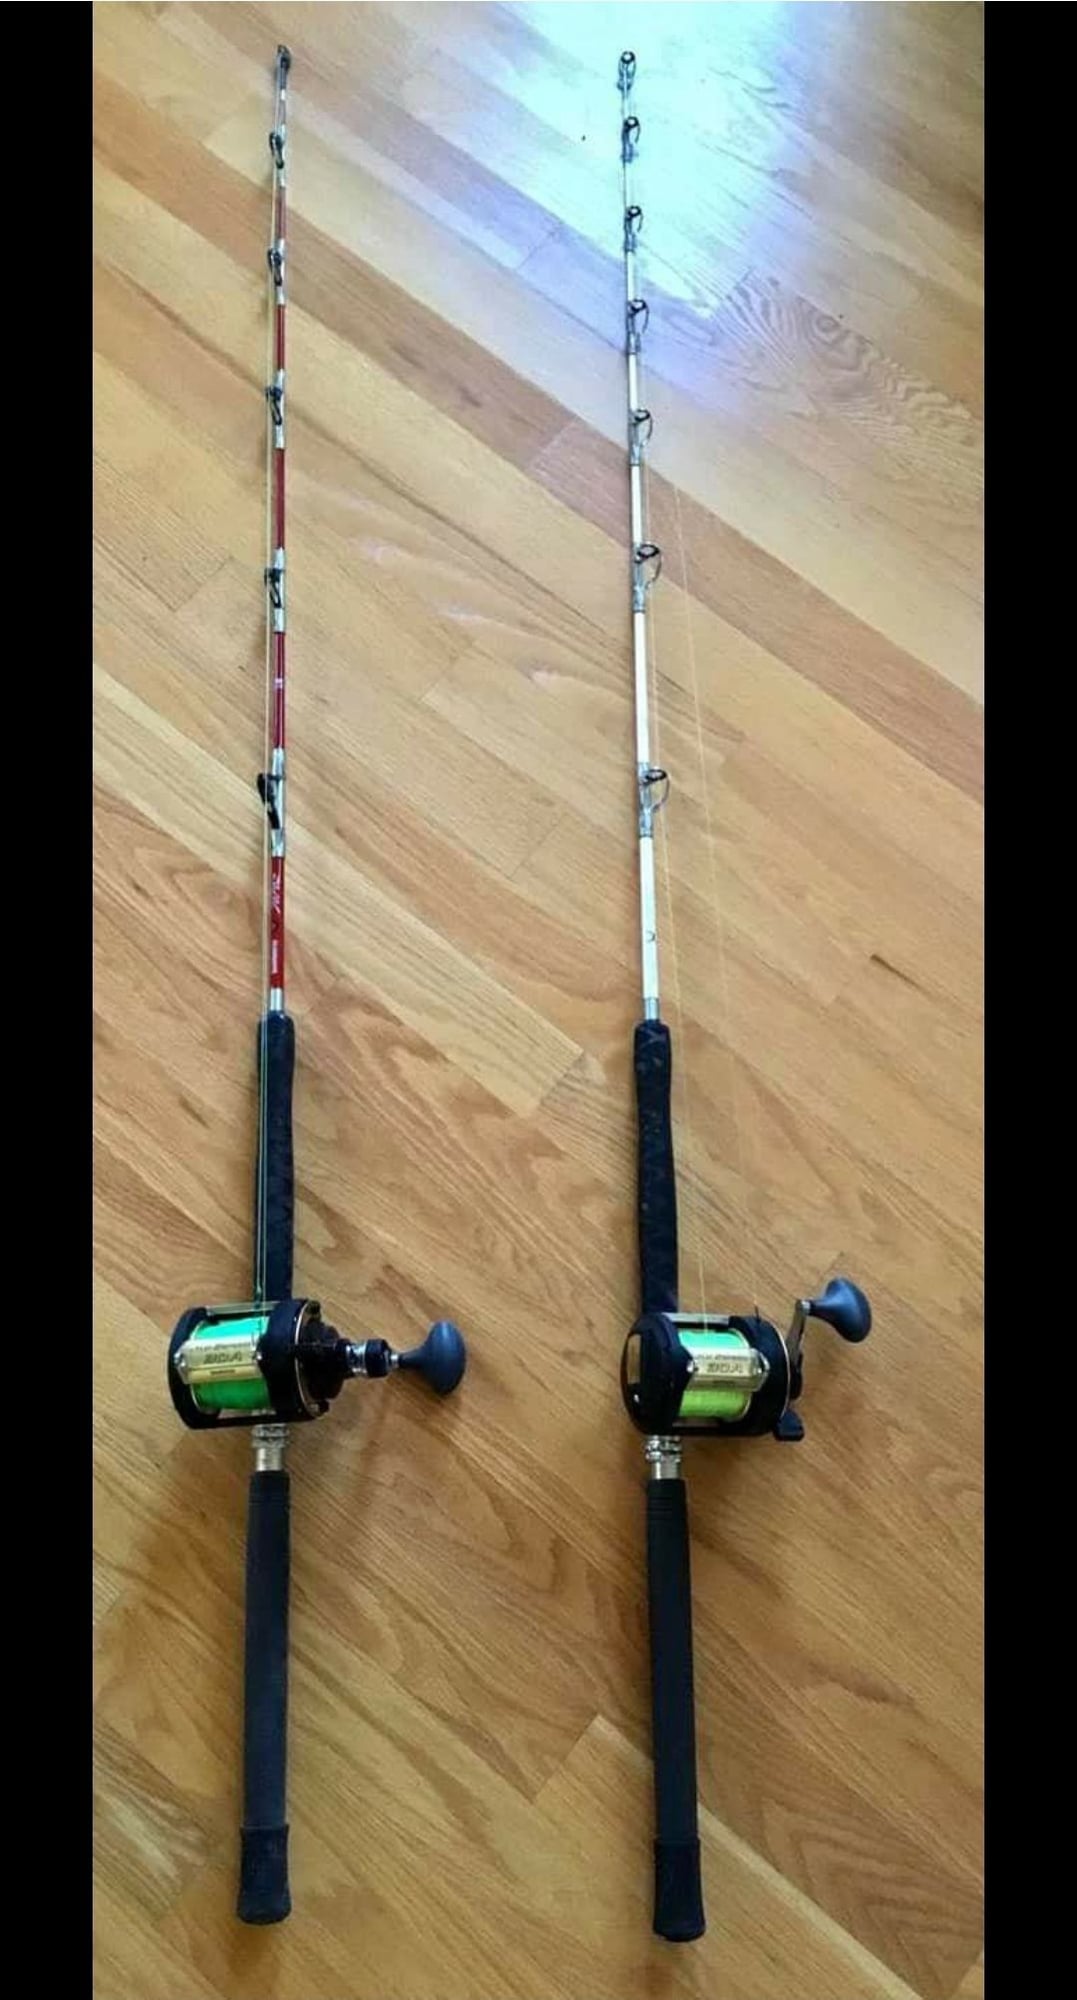 Shimano terez rods and tld reels - The Hull Truth - Boating and